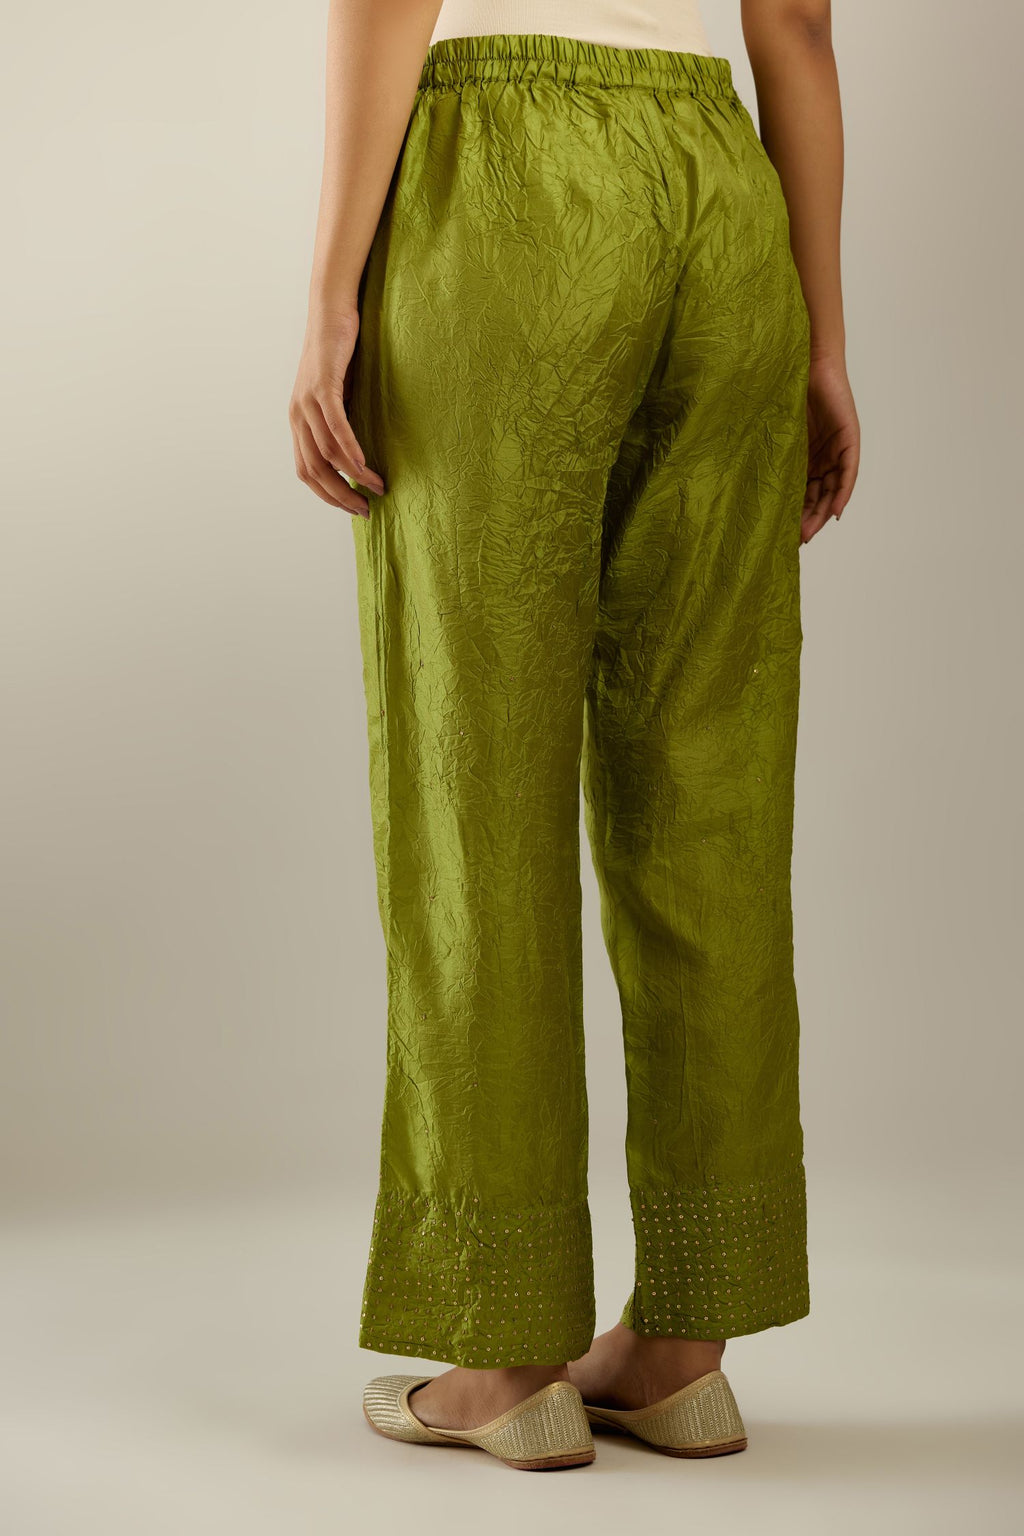 Apple green hand crushed silk straight pants detailed with gold sequins at hem and a single sequin buti is sprayed all over the pants and side pockets